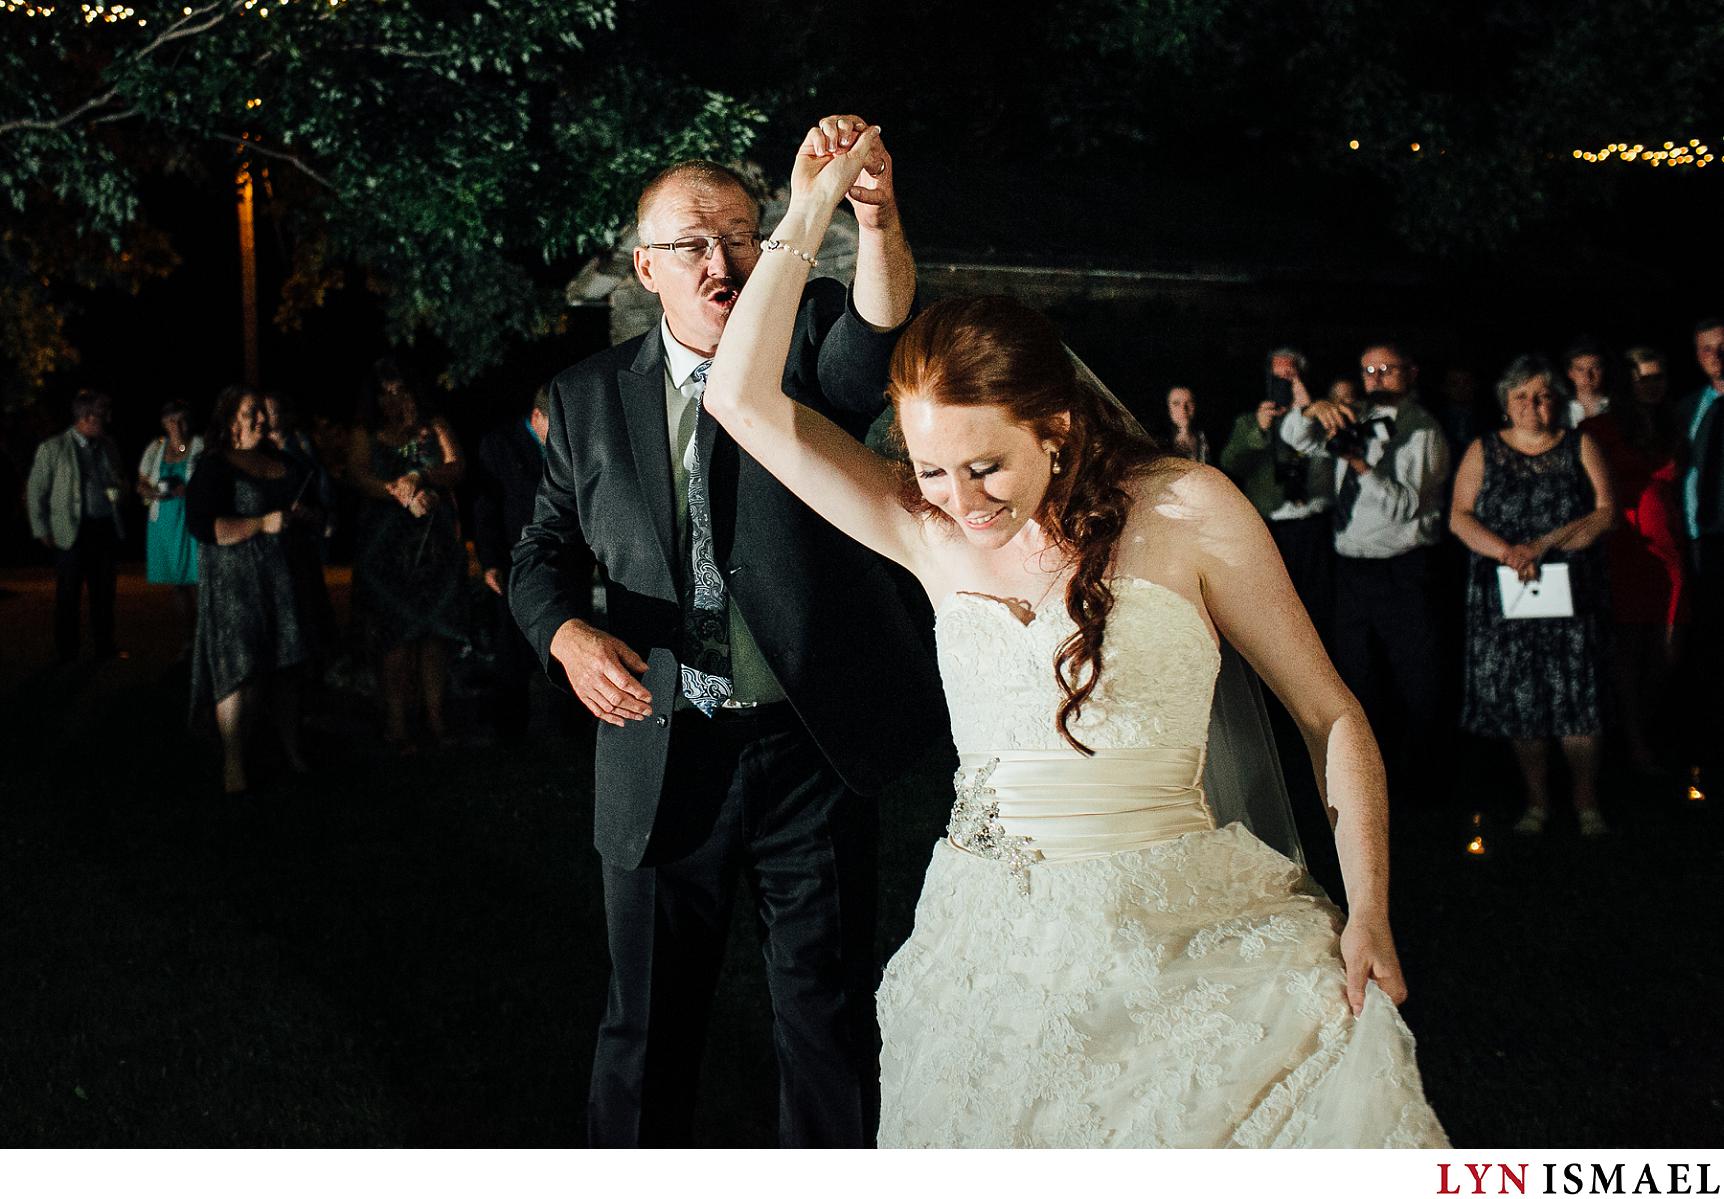 Listowel wedding photographer photographs the father dancing with his daughter.